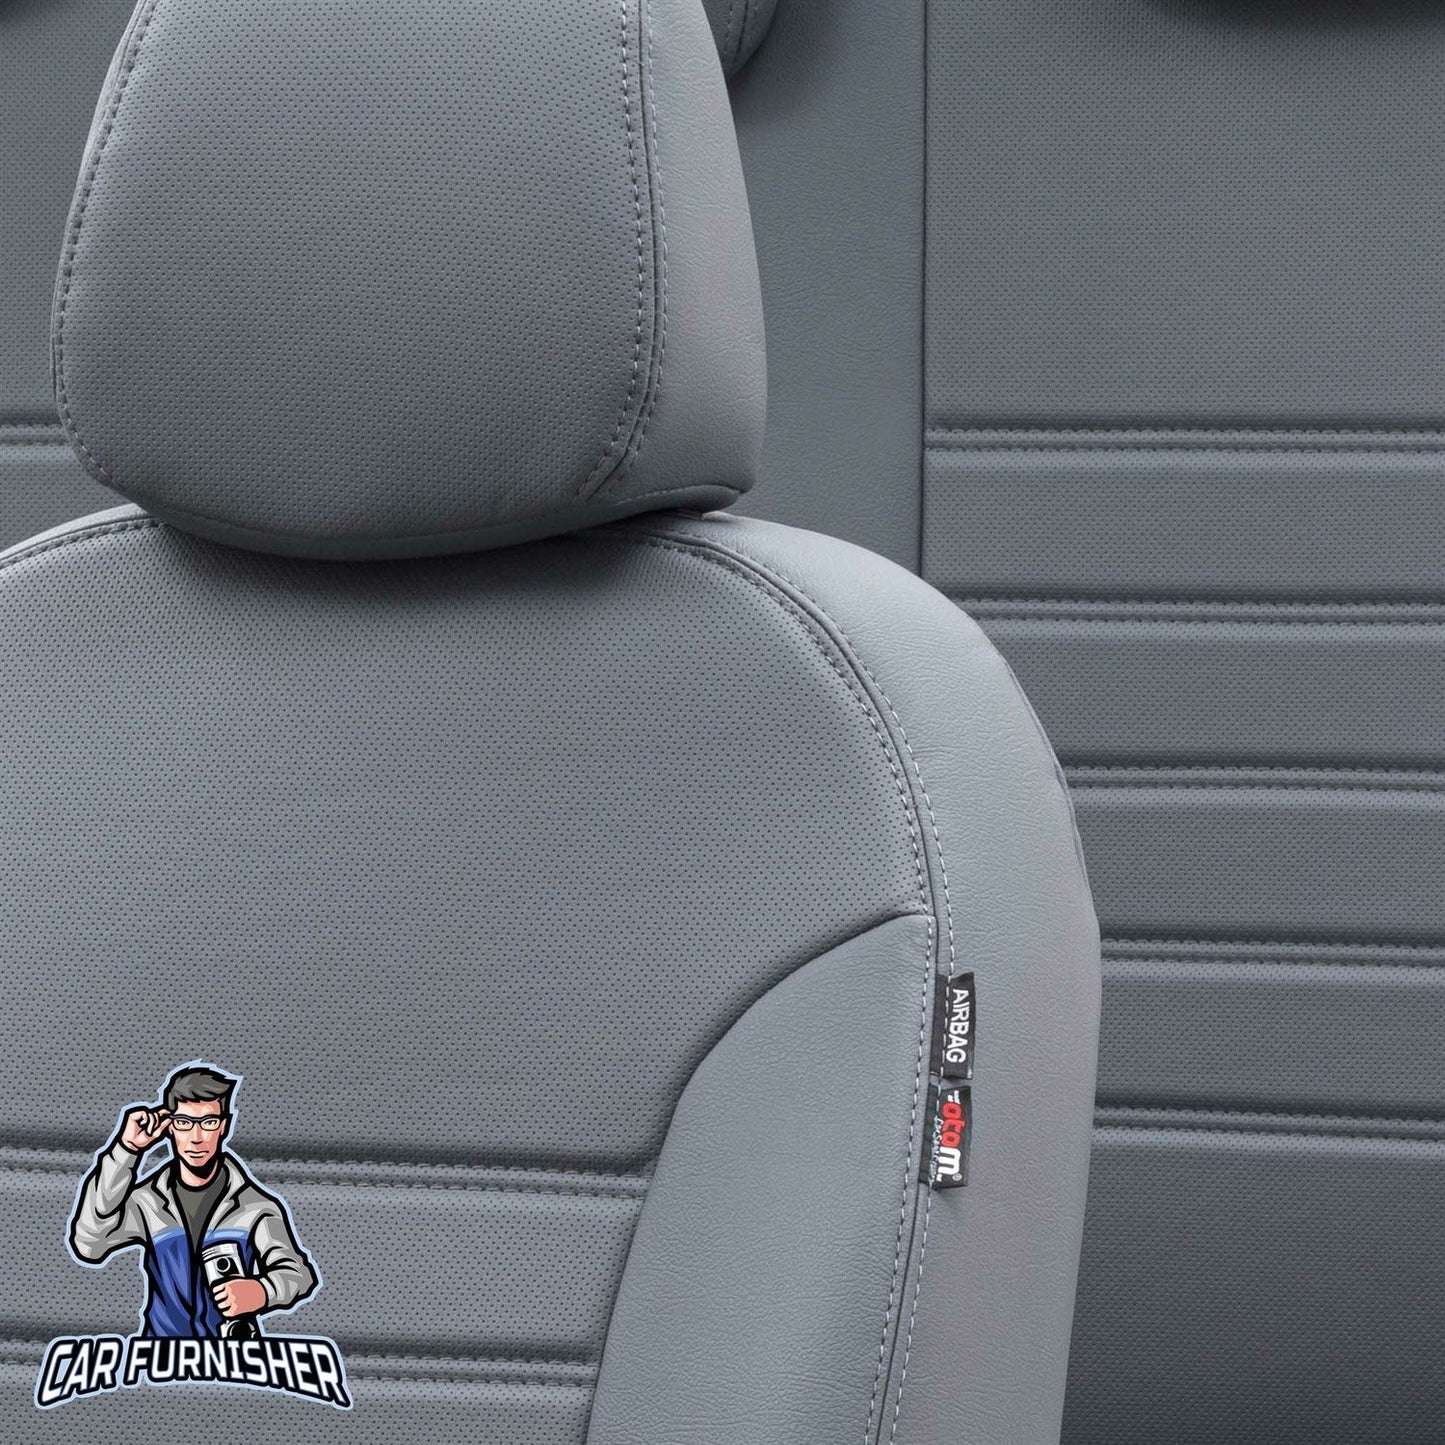 Audi Q7 Seat Cover Istanbul Leather Design Smoked Leather